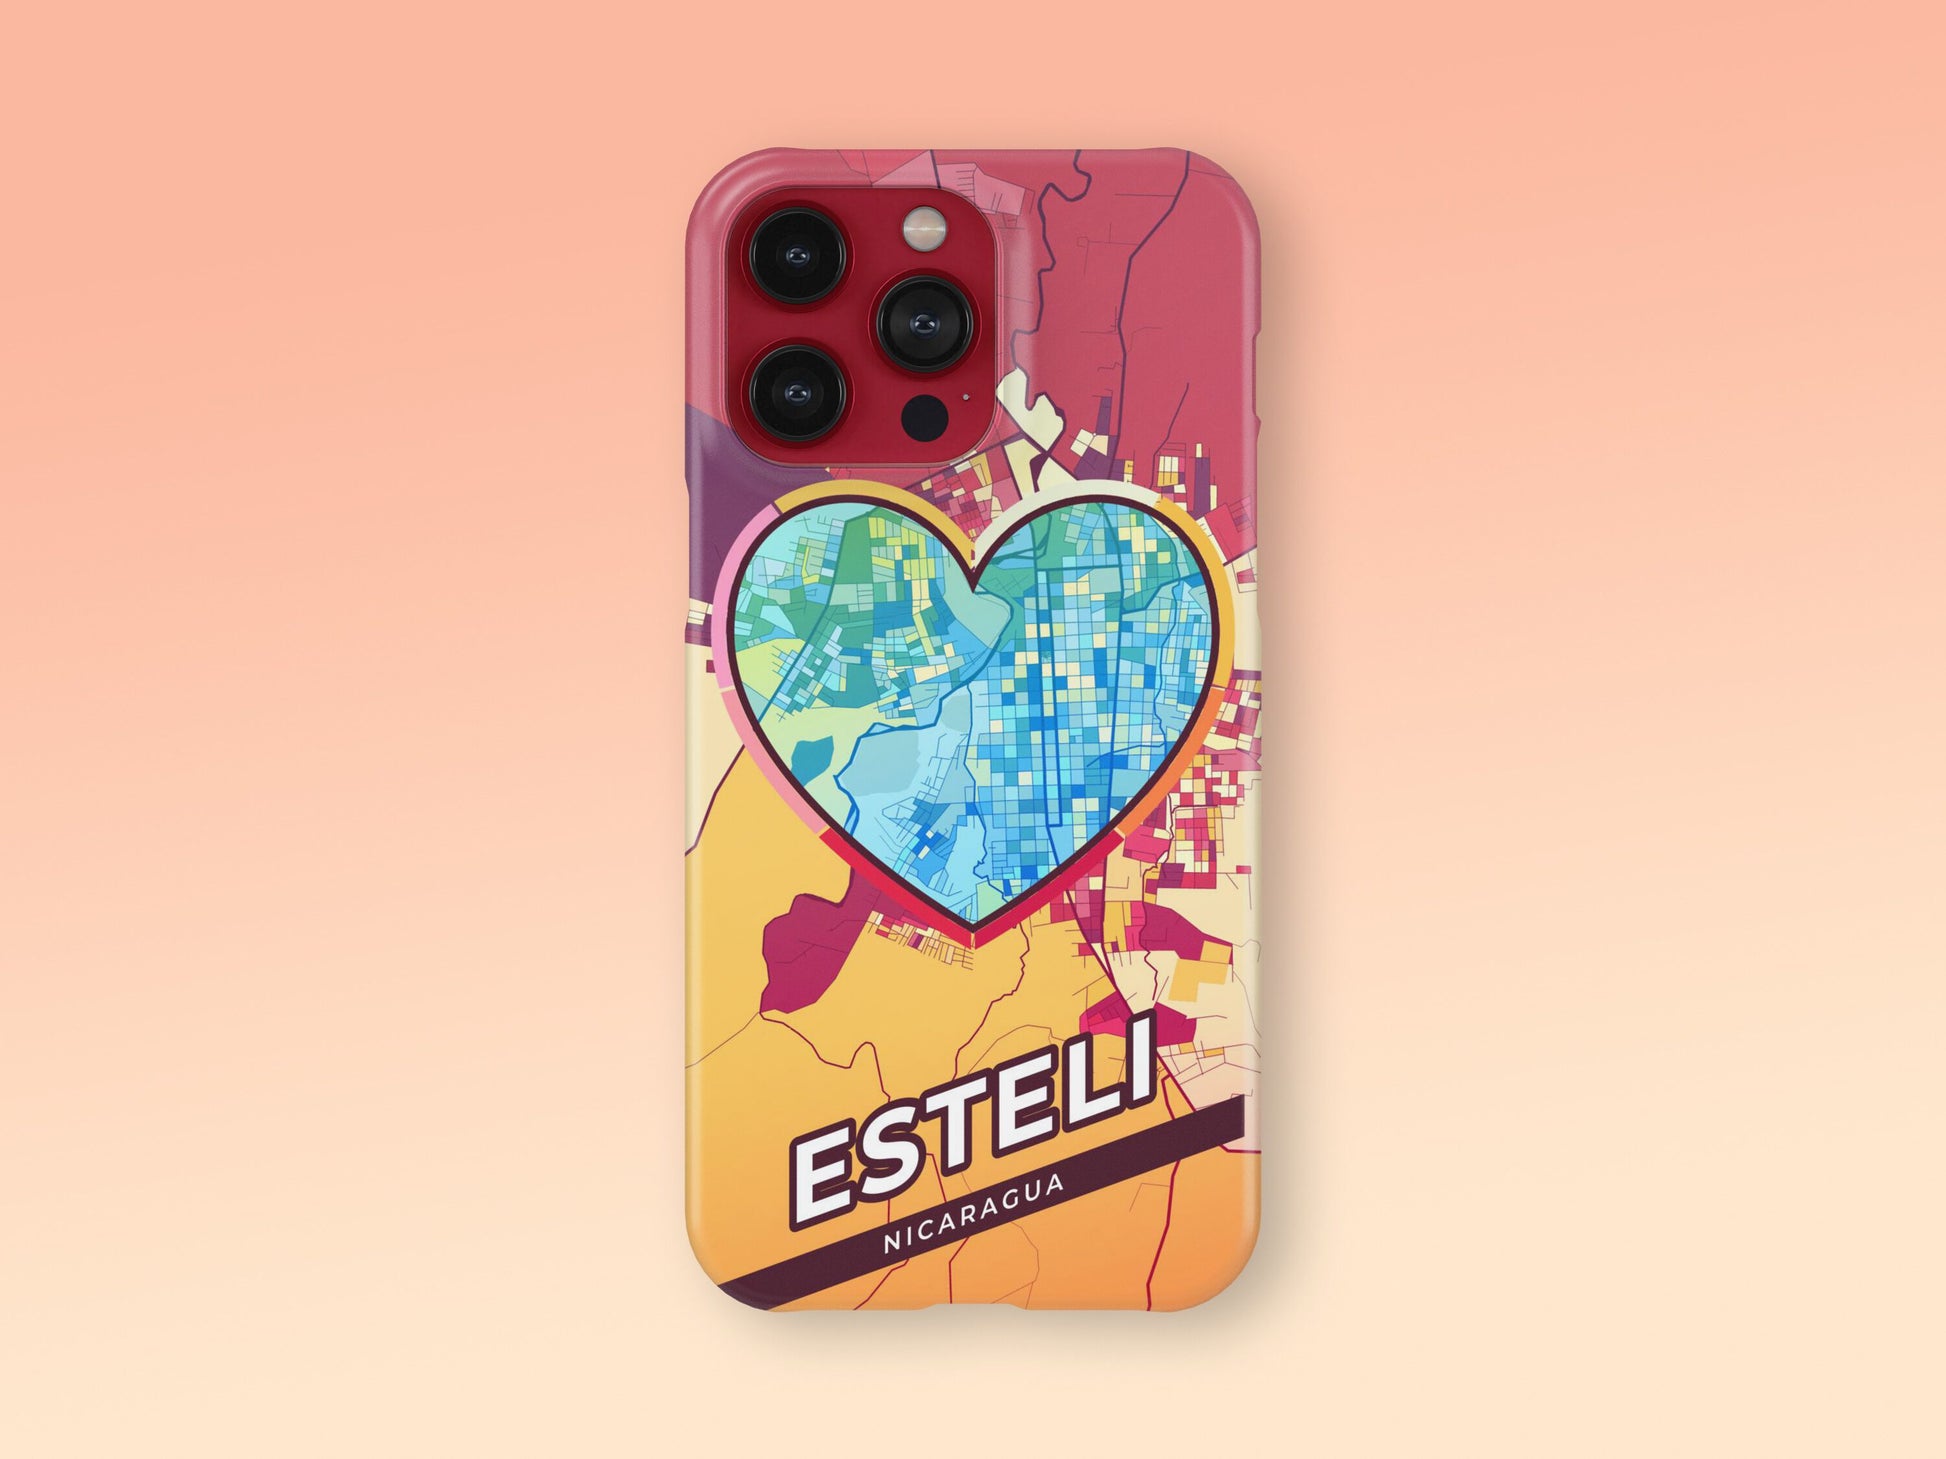 Esteli Nicaragua slim phone case with colorful icon. Birthday, wedding or housewarming gift. Couple match cases. 2